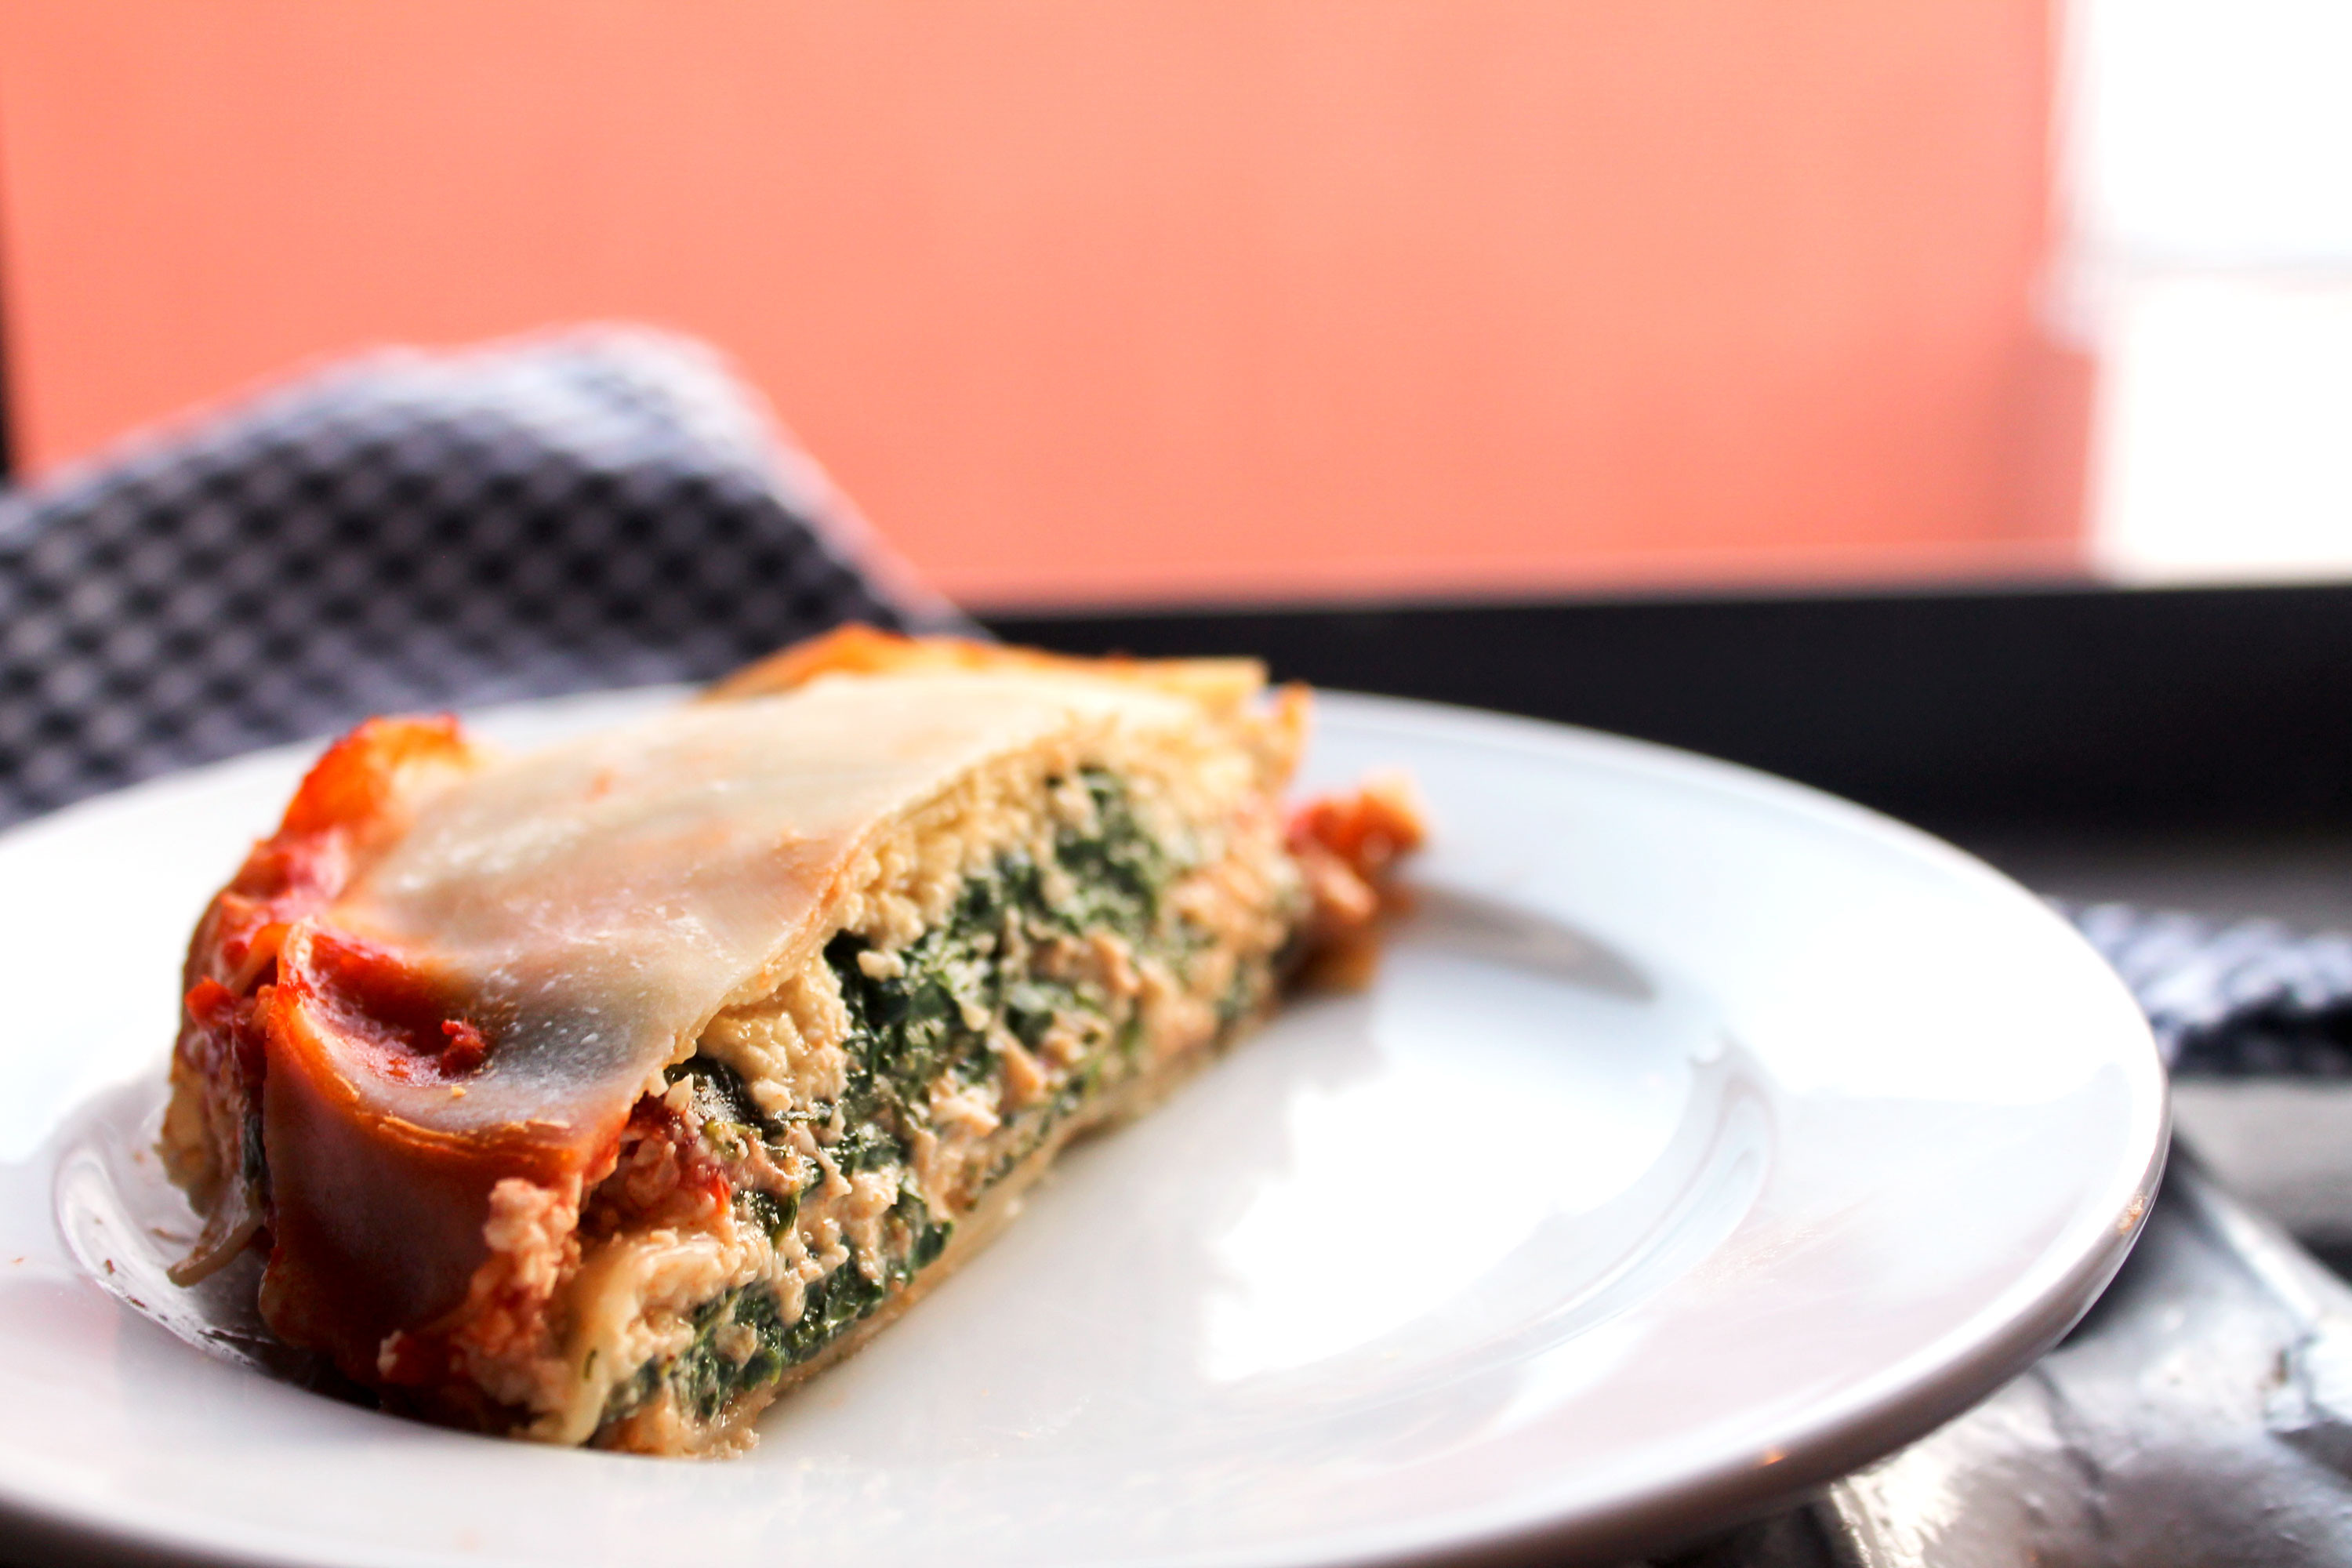 Lasagna For Two
 Vegan Ricotta and Spinach Lasagna for Two